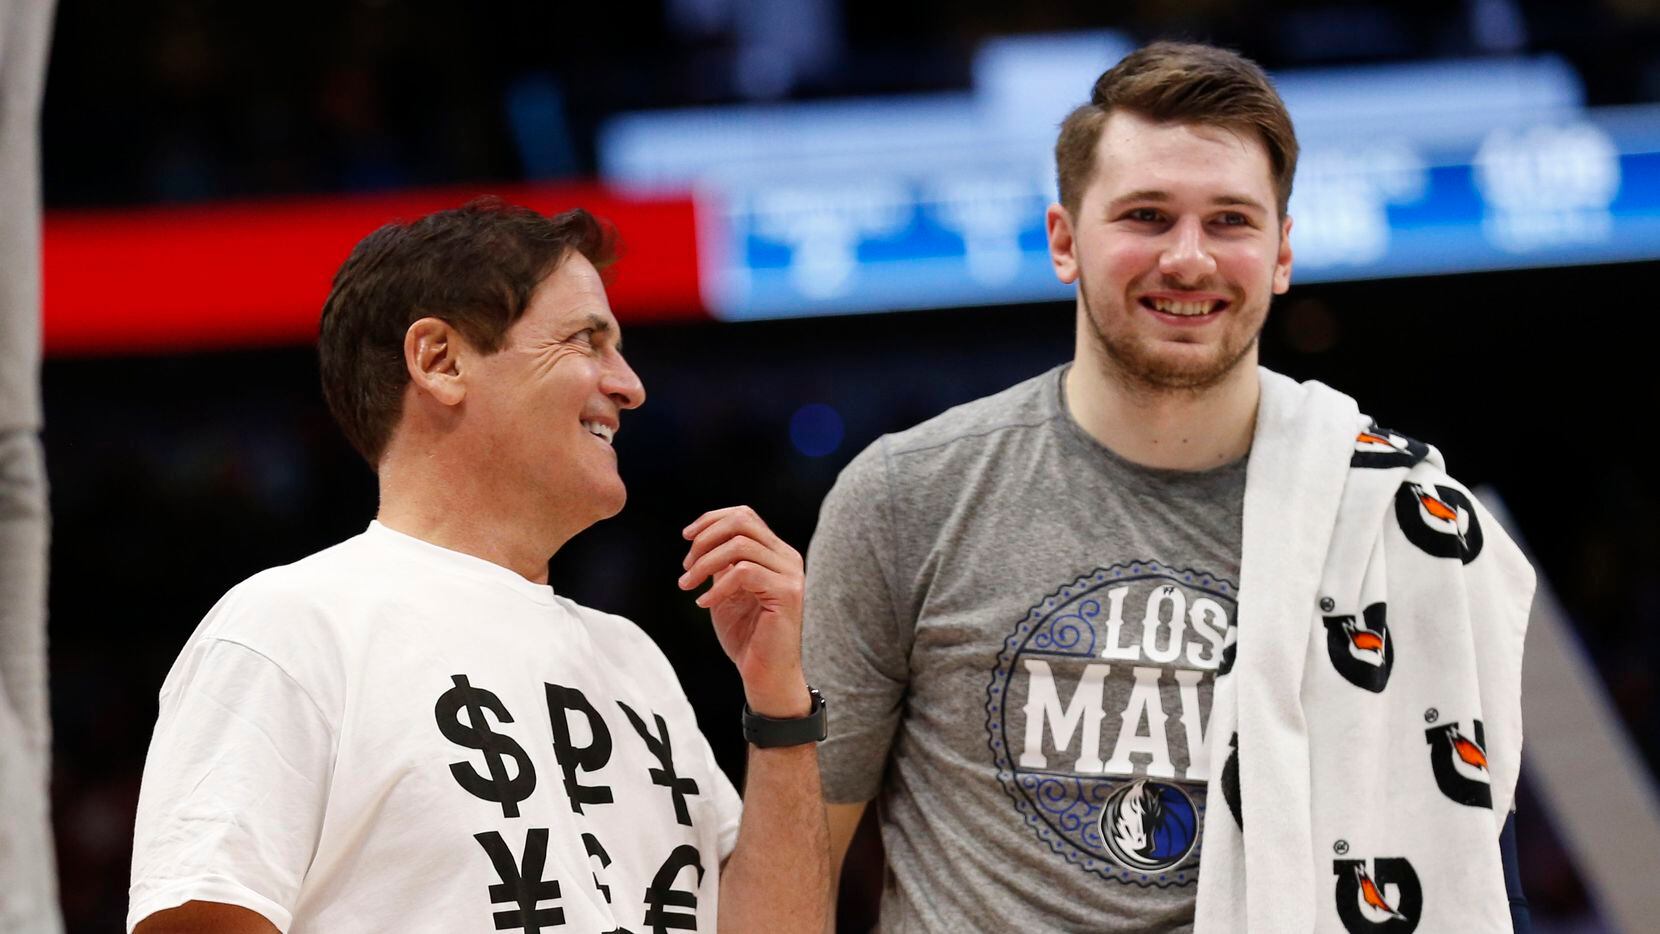 This is just the beginning': Mark Cuban, Dirk Nowitzki remain optimistic  after Mavs' playoff exit